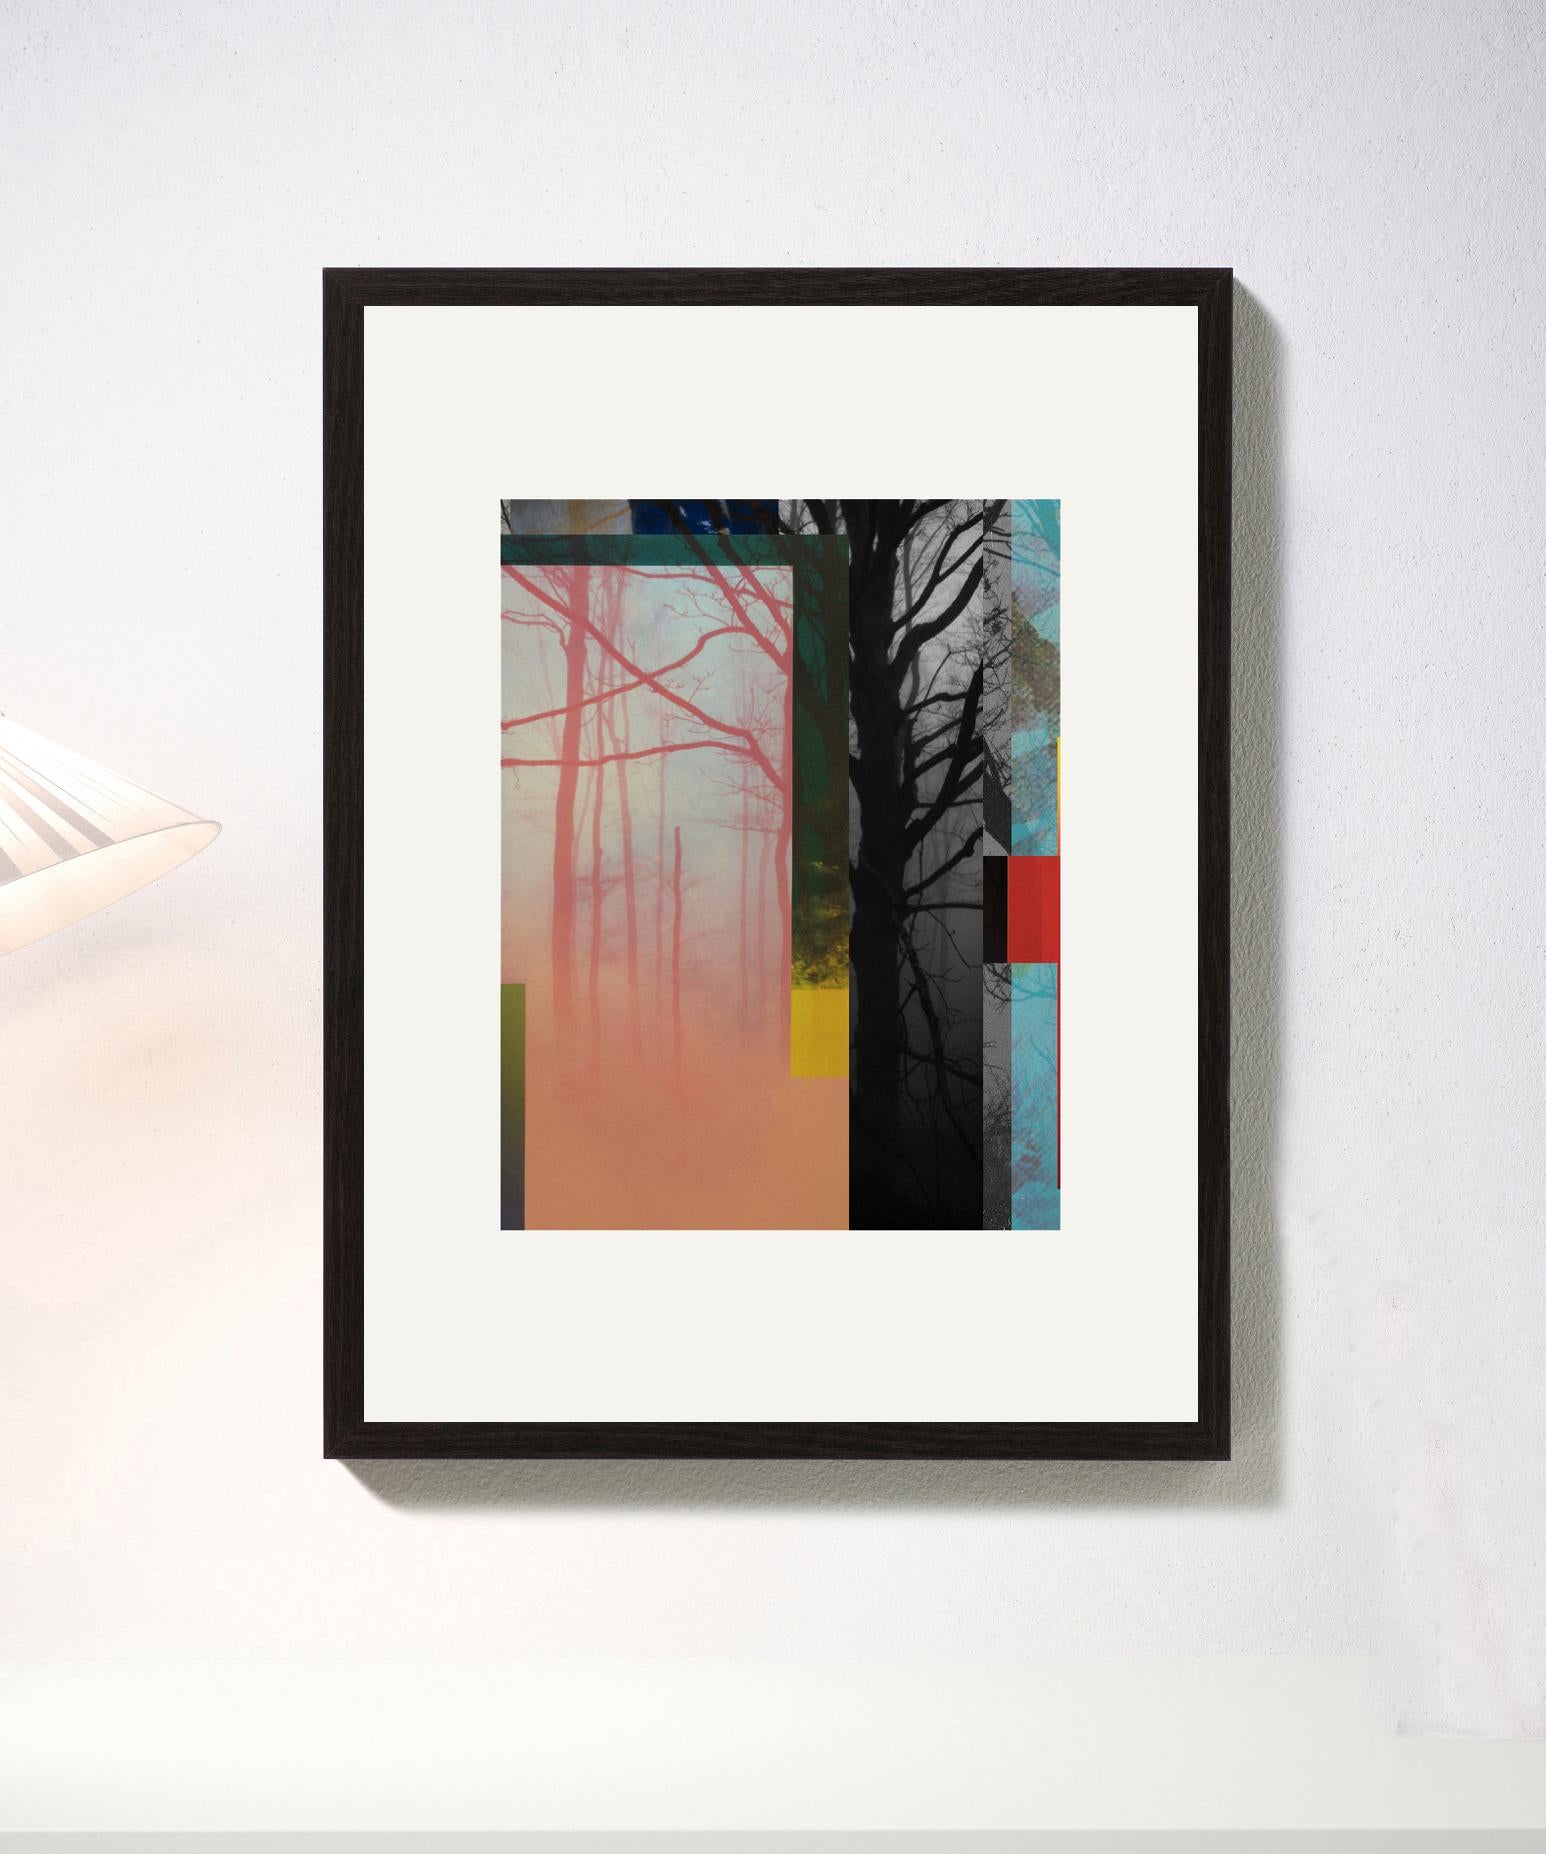 Digital pigment print Ultrachrome ink on Fabriano Rosaspina paper. Hand signed by the artist, and certificate of authenticity. Edition of 25  (Unframed)

His work has been shown in Reina Sofía Museum of Madrid, Royal Academy of London, Arco Madrid,